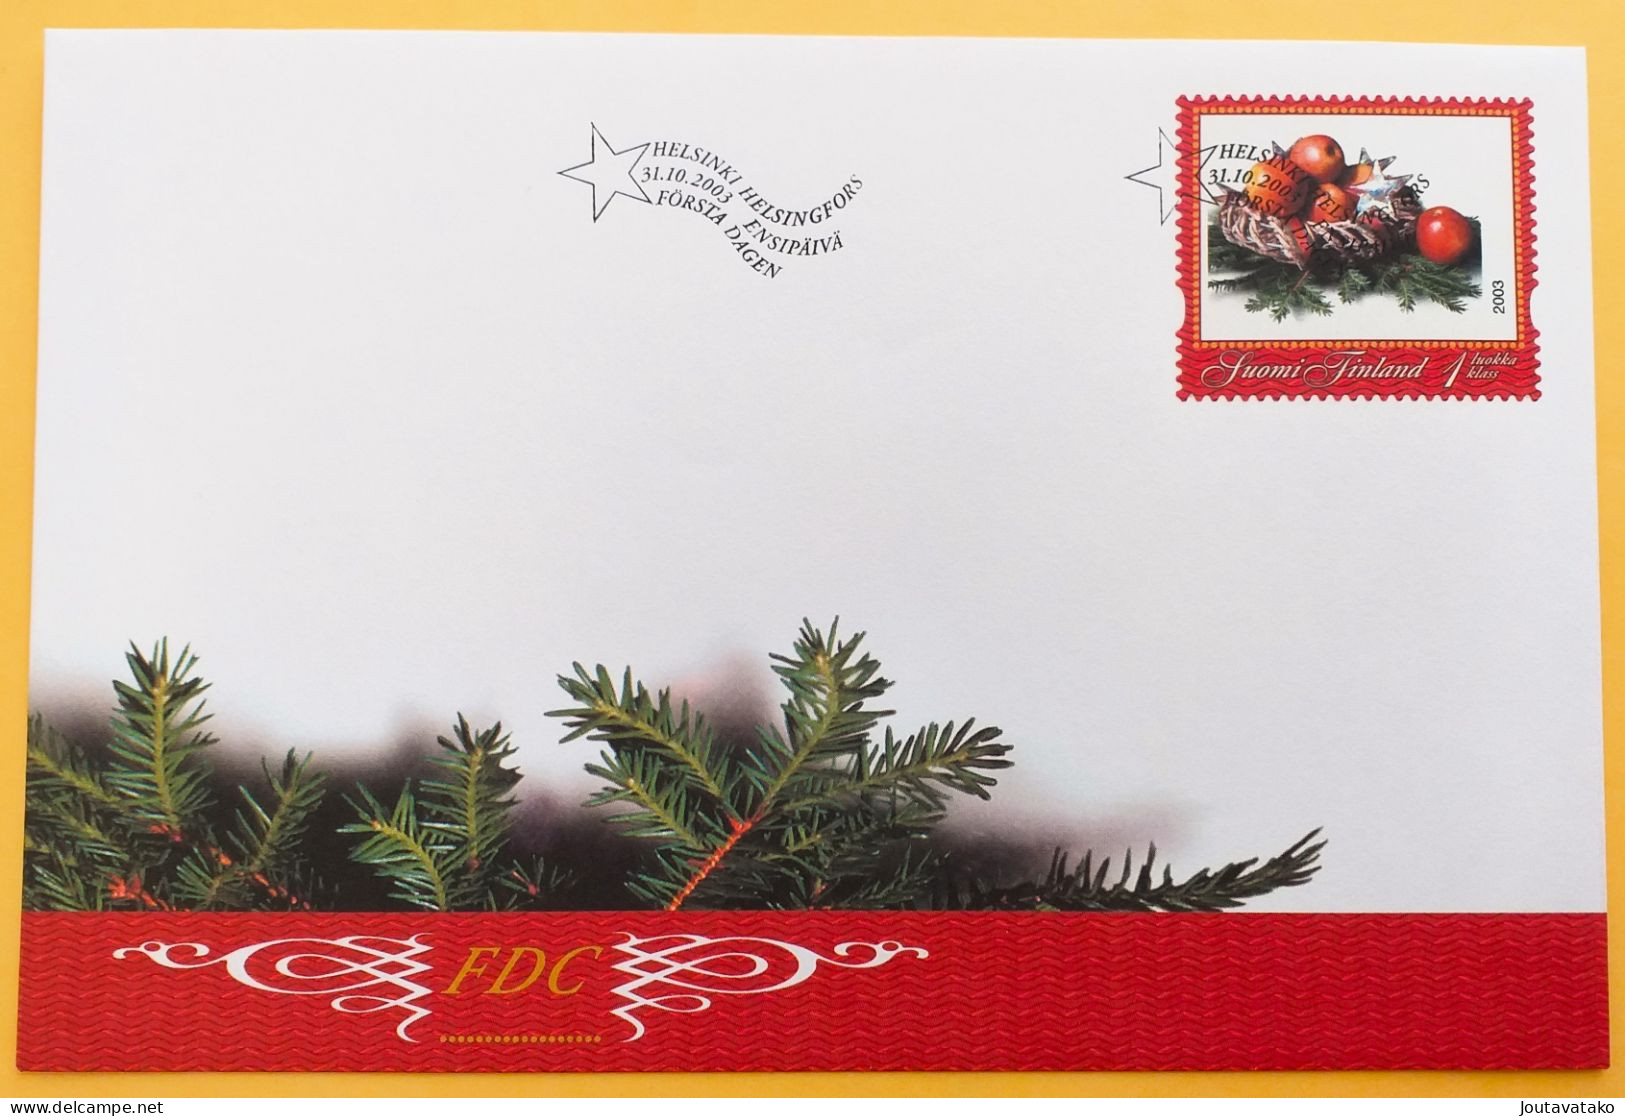 Finland FDC 2003 - Personal Stamp Finland Post, Christmas - Apples - MiNo 1678 - FDC